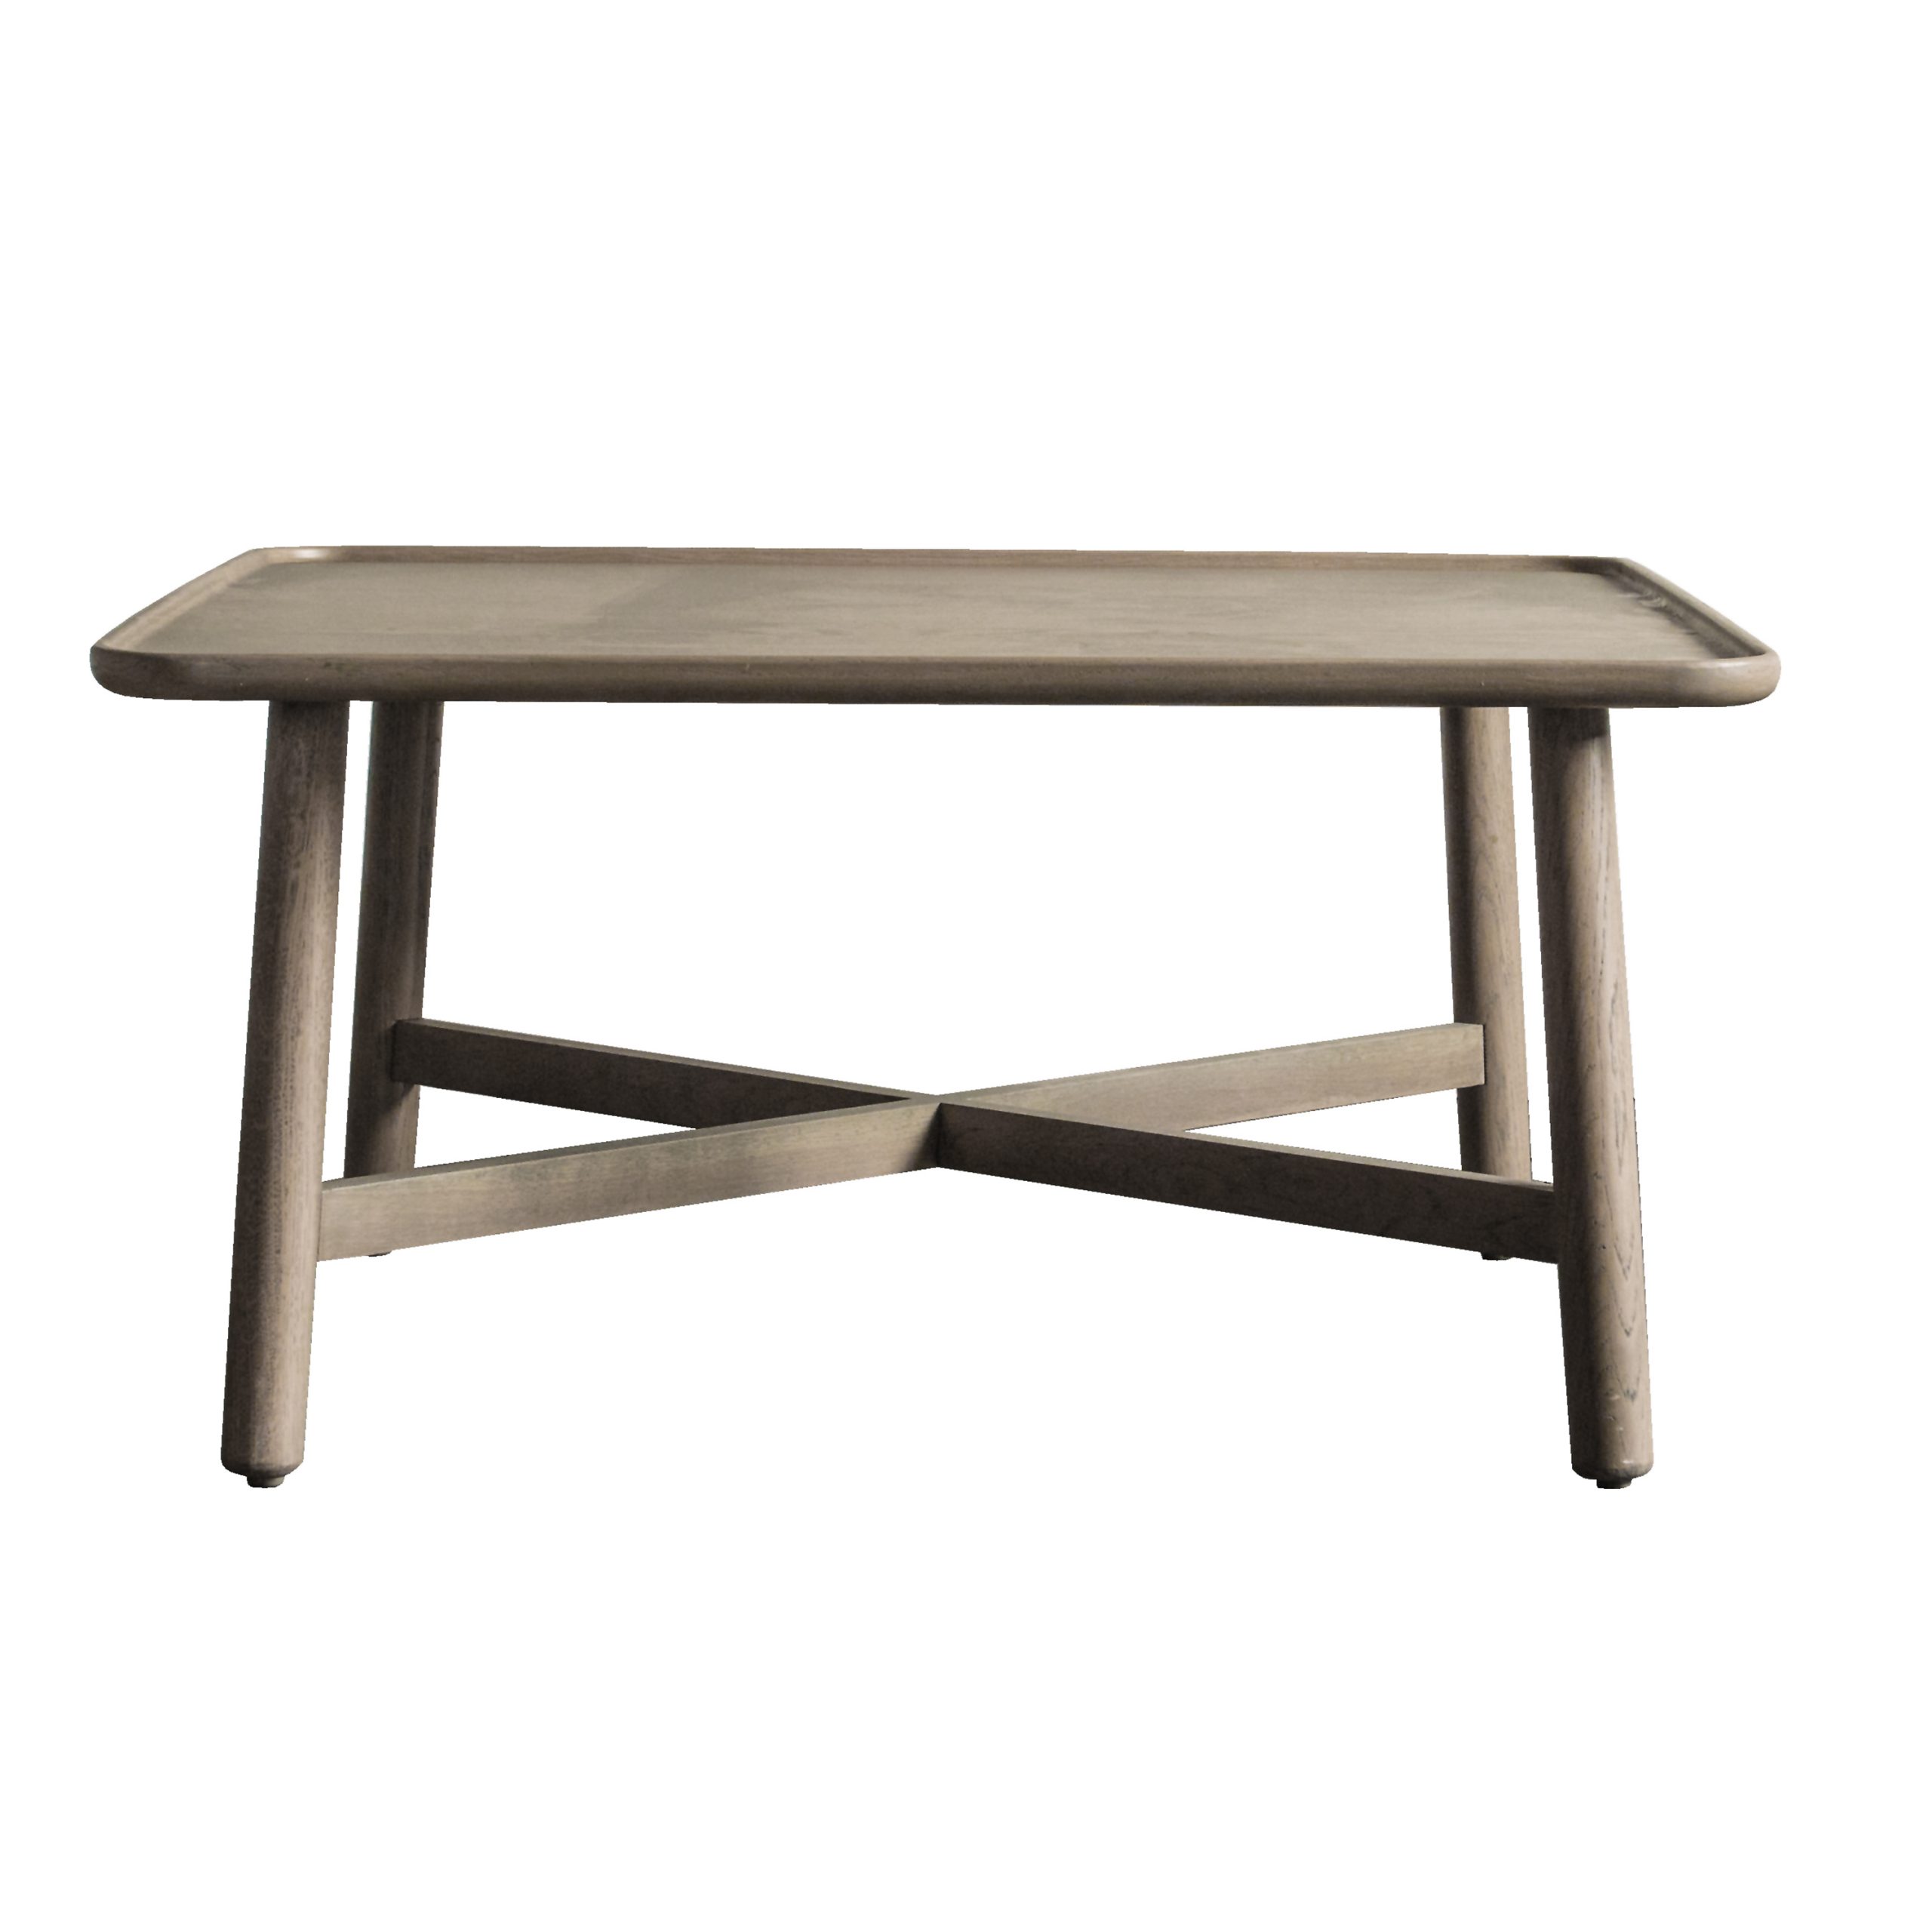 Gallery Direct Kingham Square Coffee Table Grey